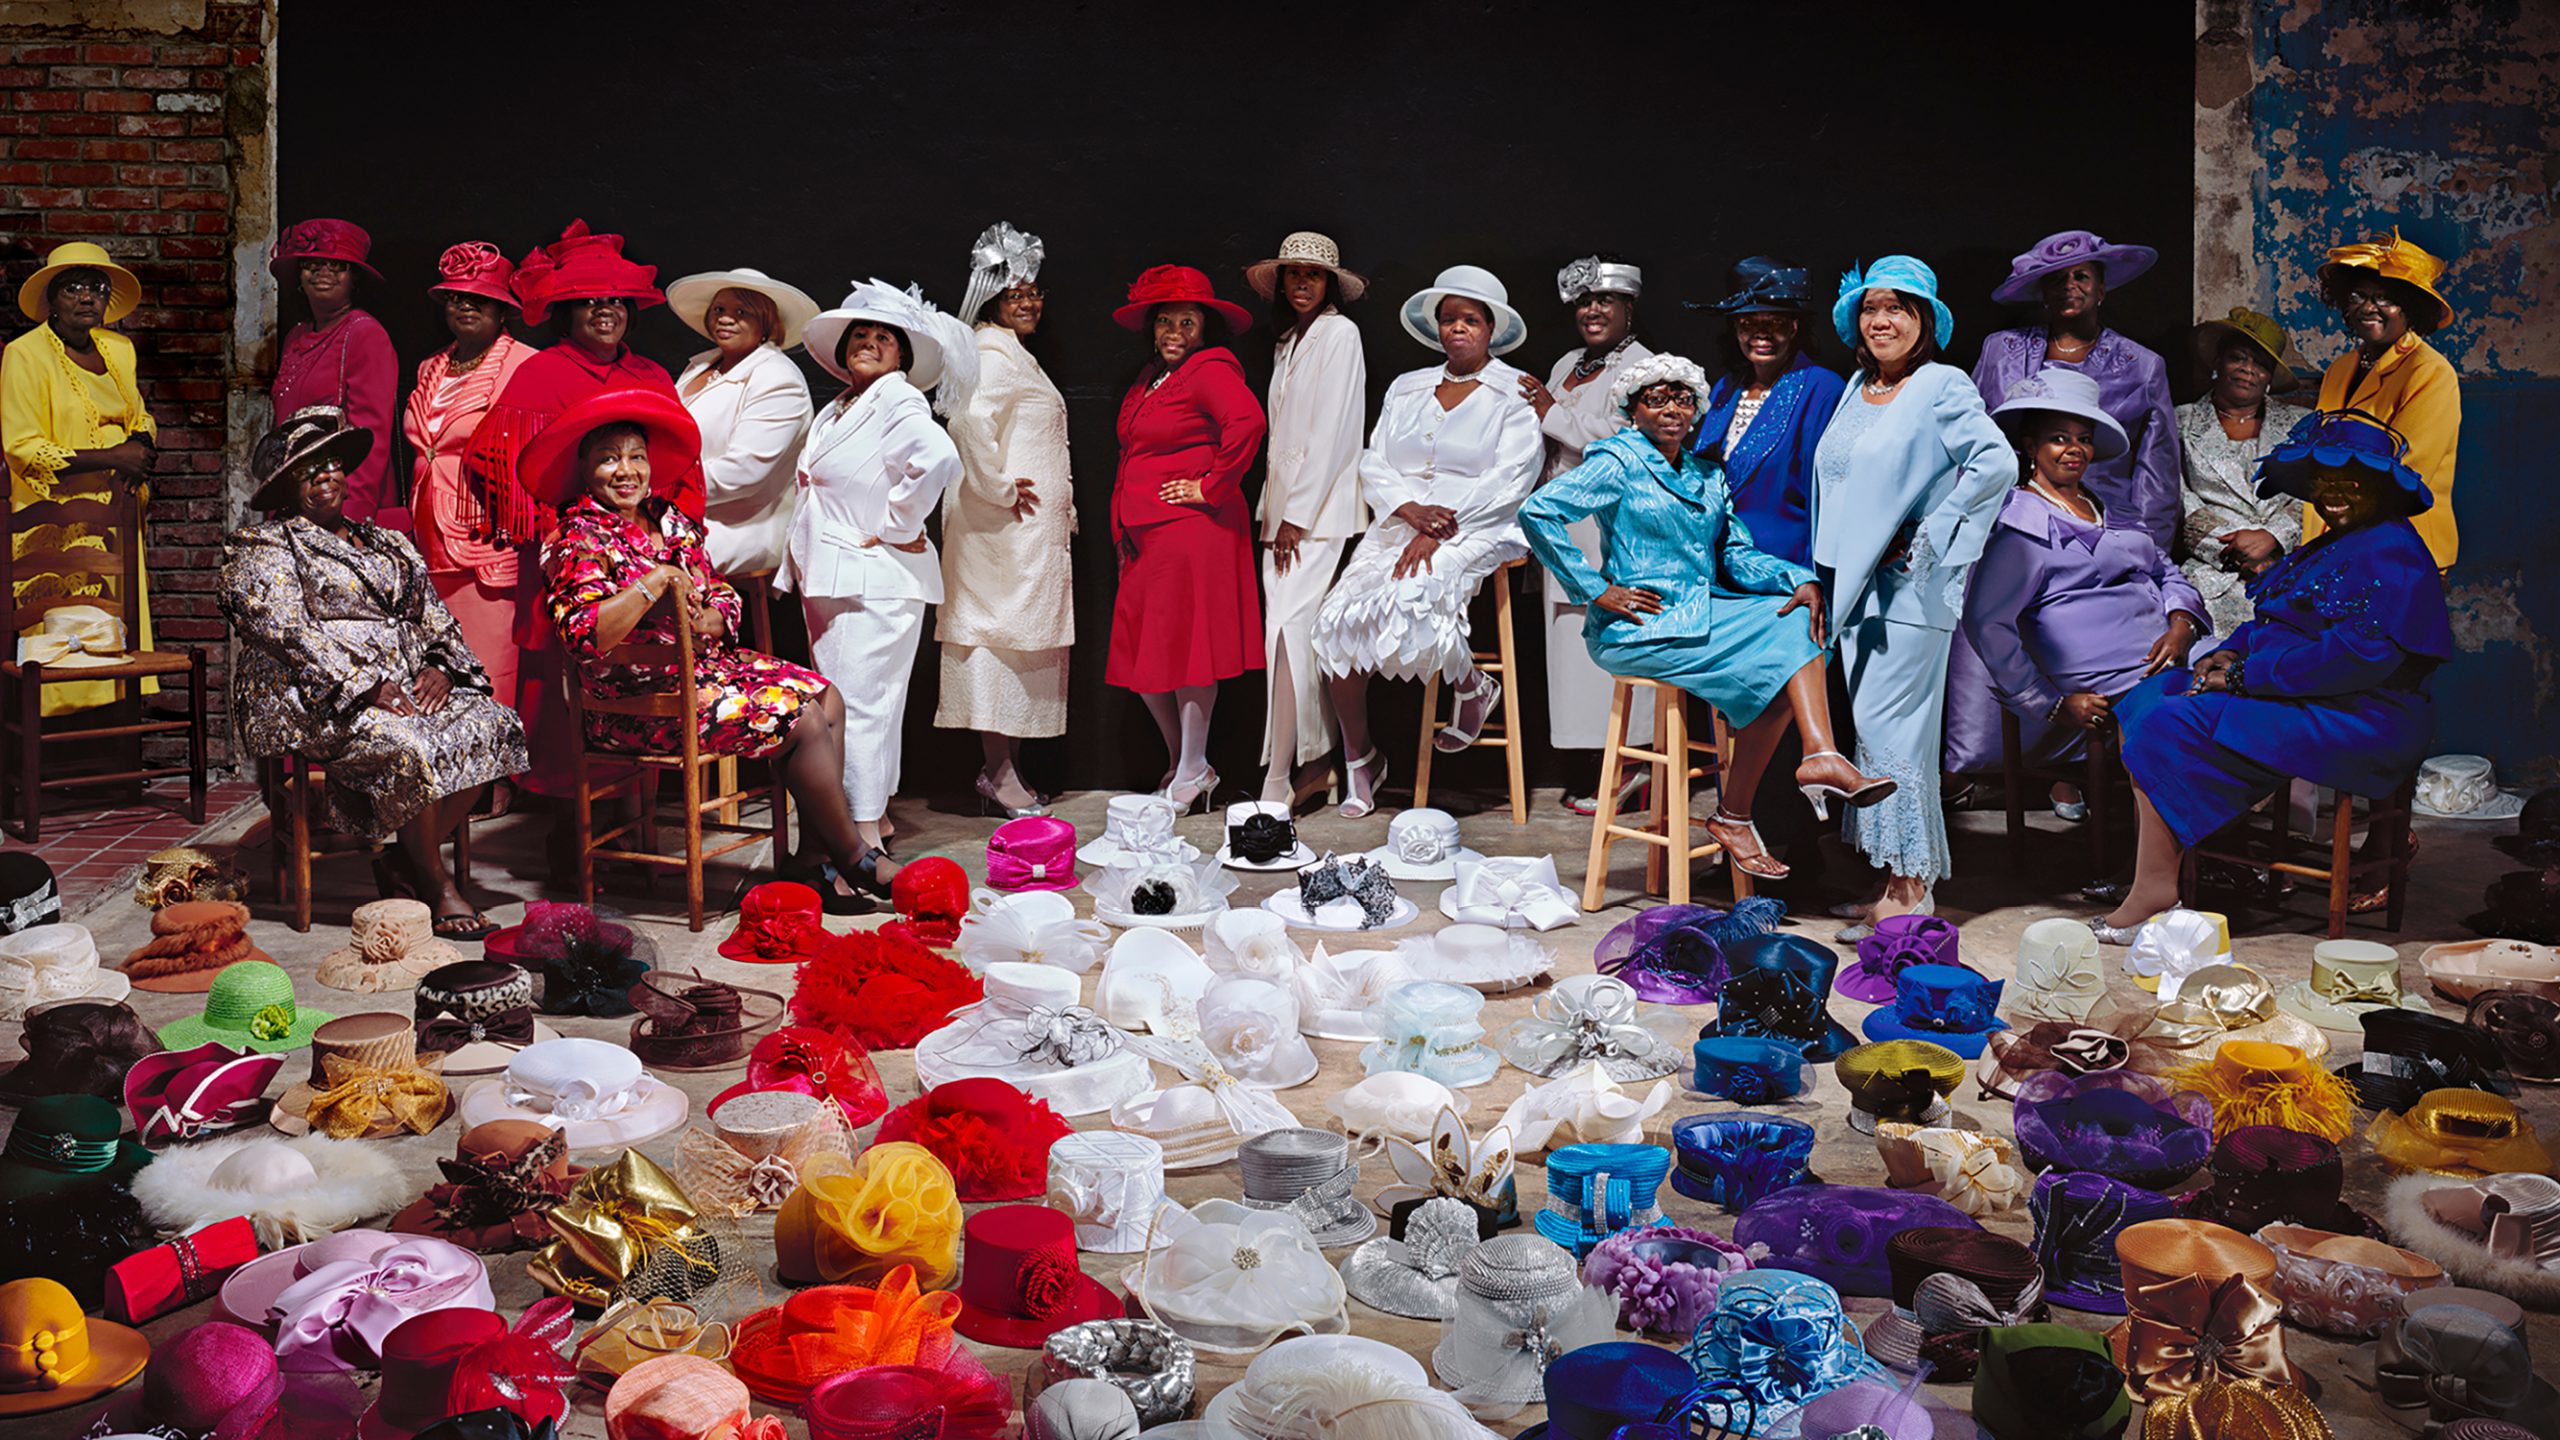 Color photograph of a group of black women dressed in solid colors from the rainbow. In front of the group, is a floor full of colorful hats.